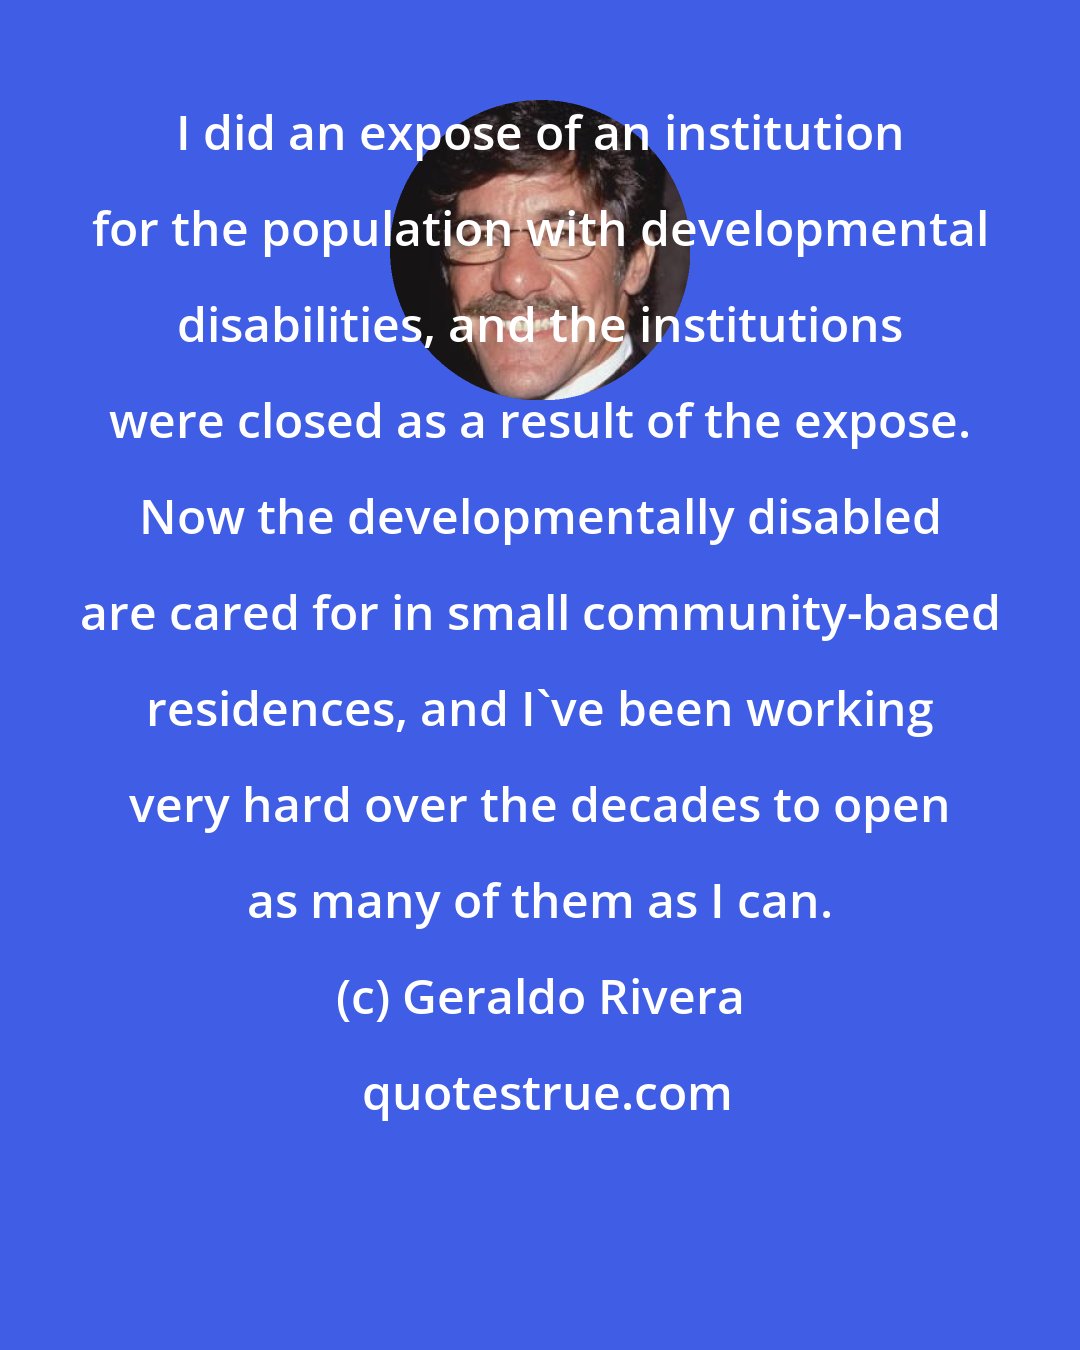 Geraldo Rivera: I did an expose of an institution for the population with developmental disabilities, and the institutions were closed as a result of the expose. Now the developmentally disabled are cared for in small community-based residences, and I've been working very hard over the decades to open as many of them as I can.